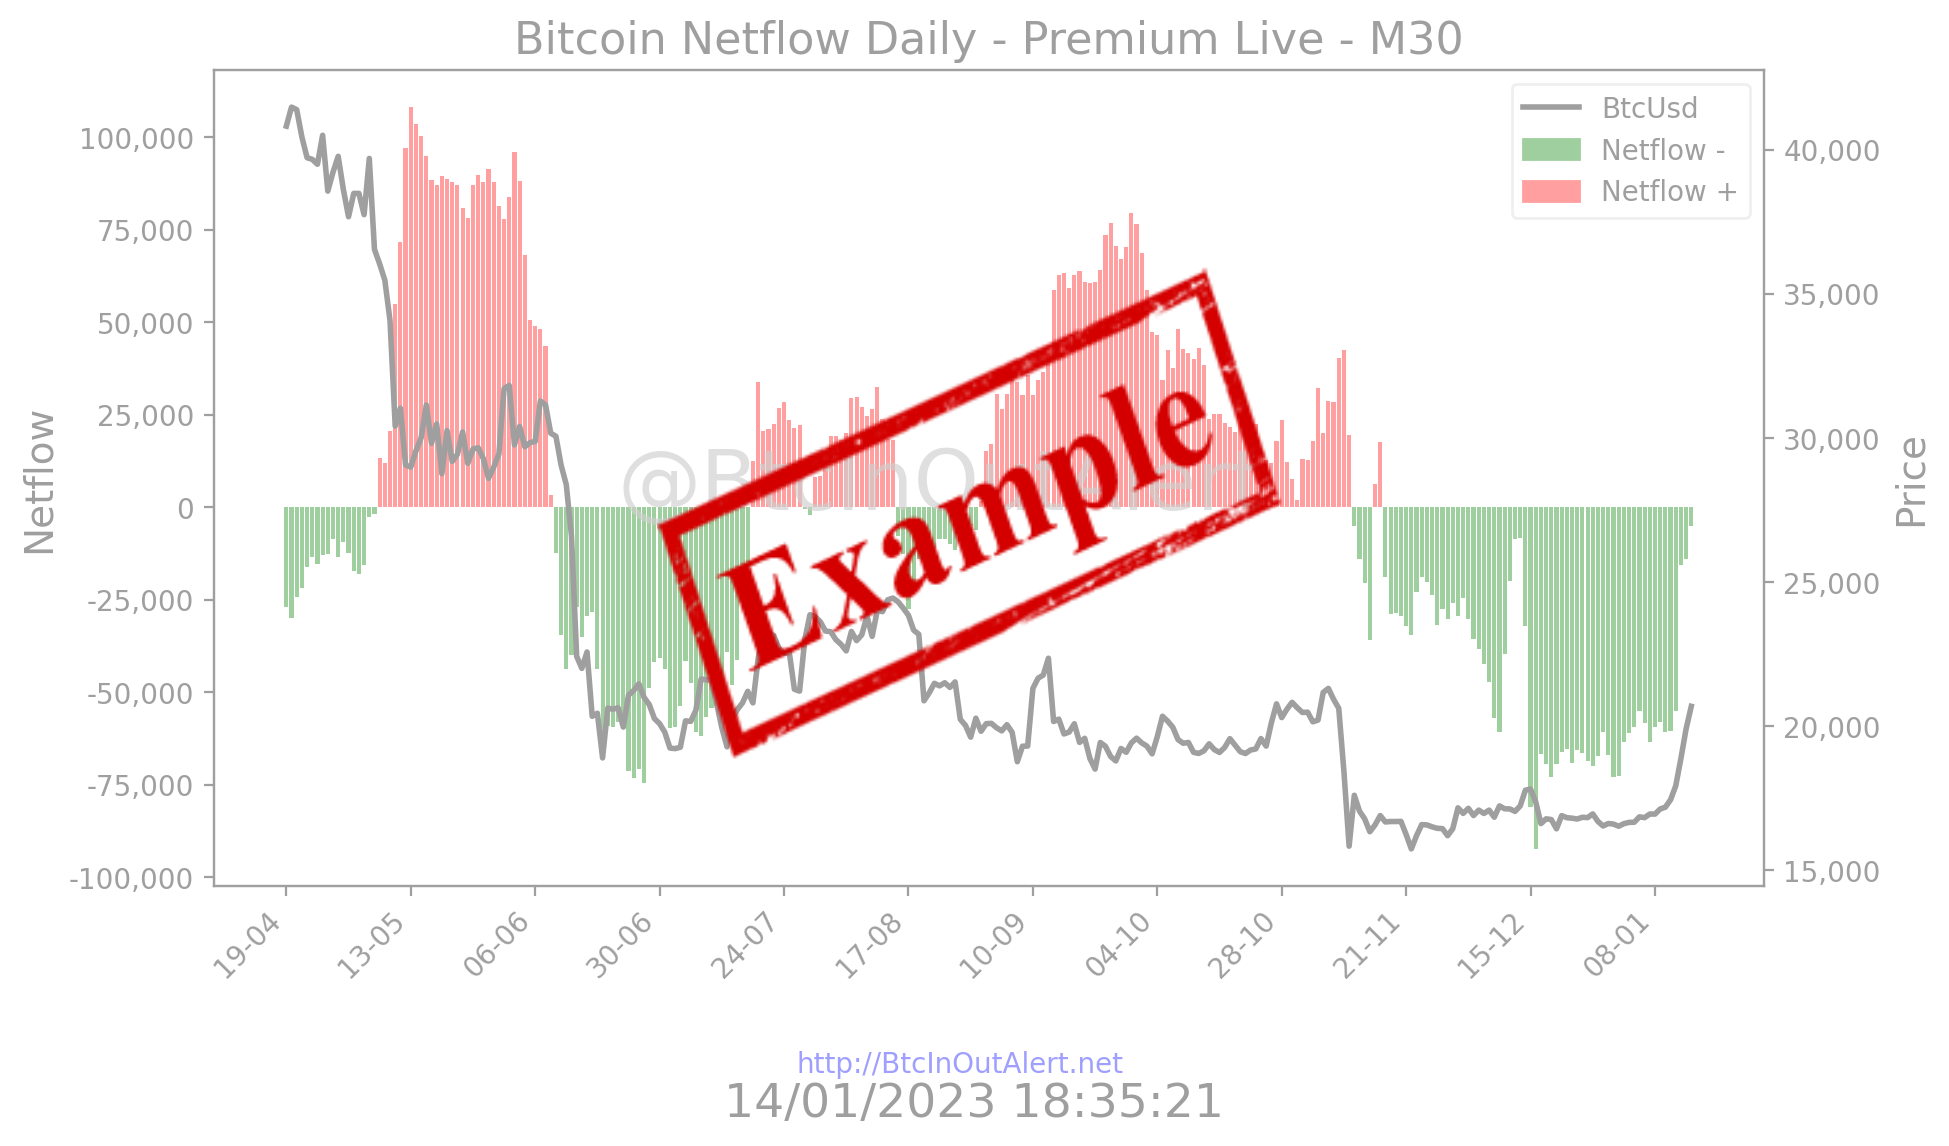 Bitcoin Netflow Daily Live M30